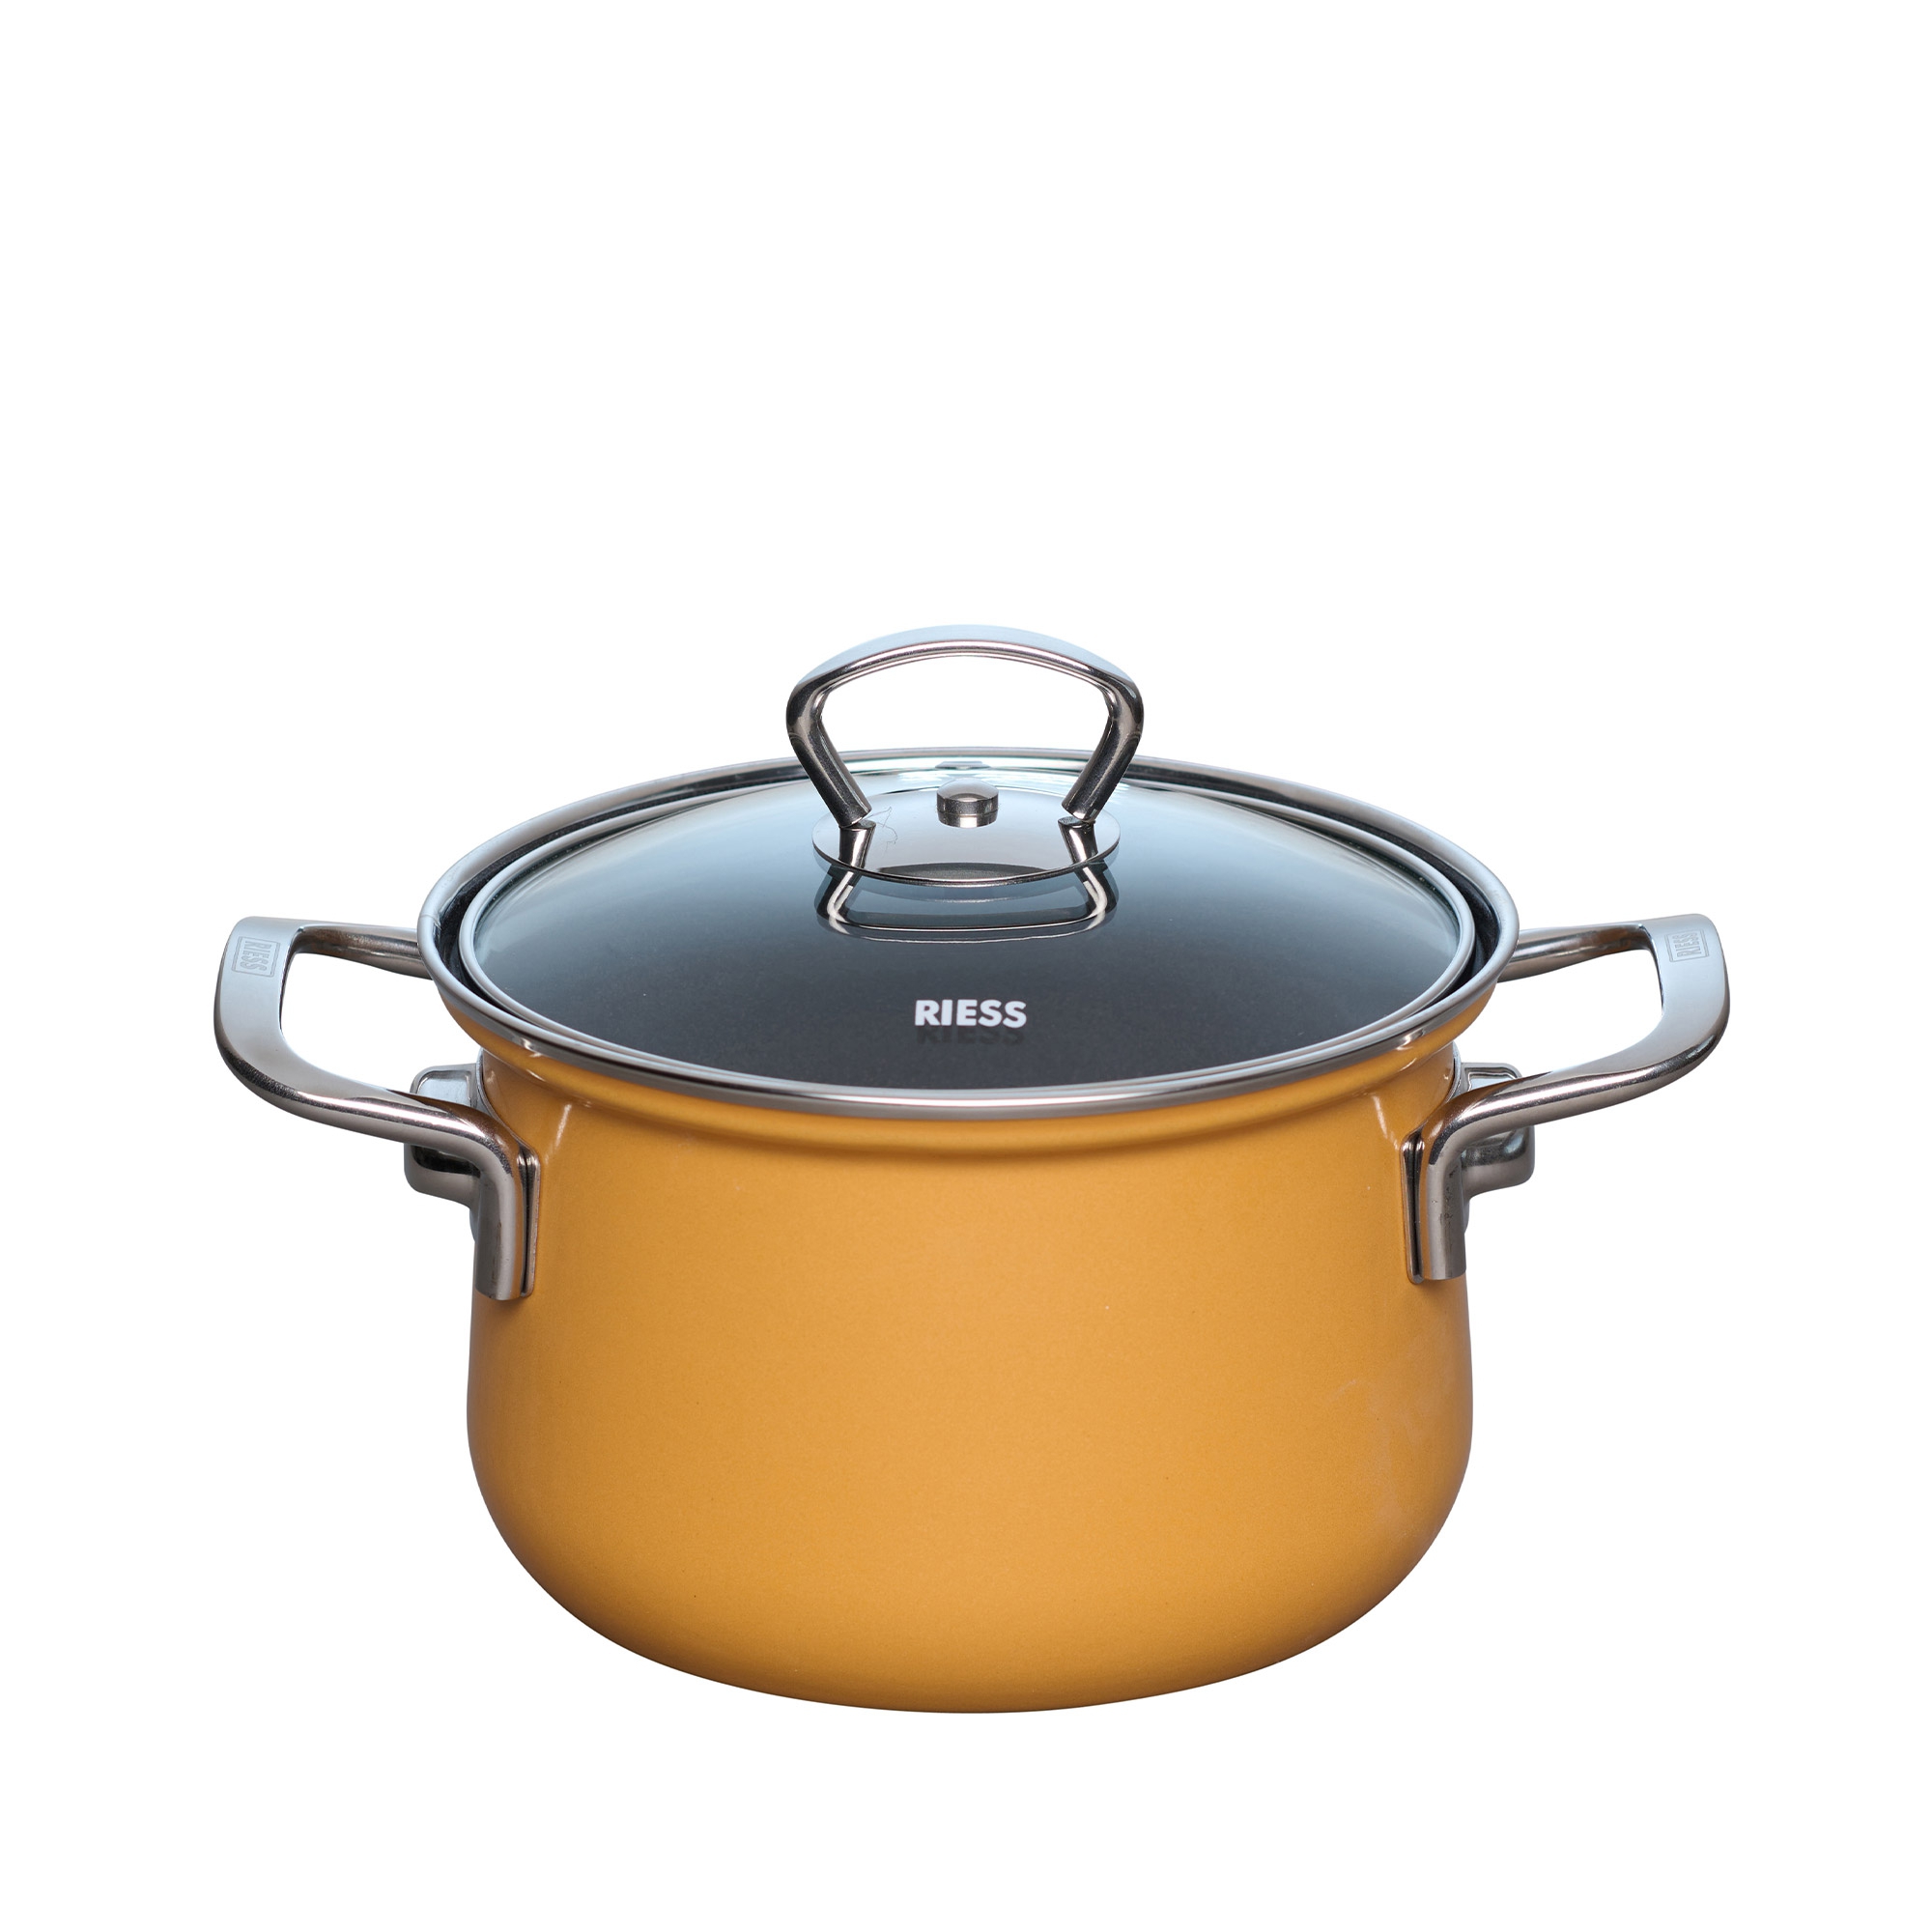 Riess NOUVELLE - Orange - Stewpot with glass lid 16 cm